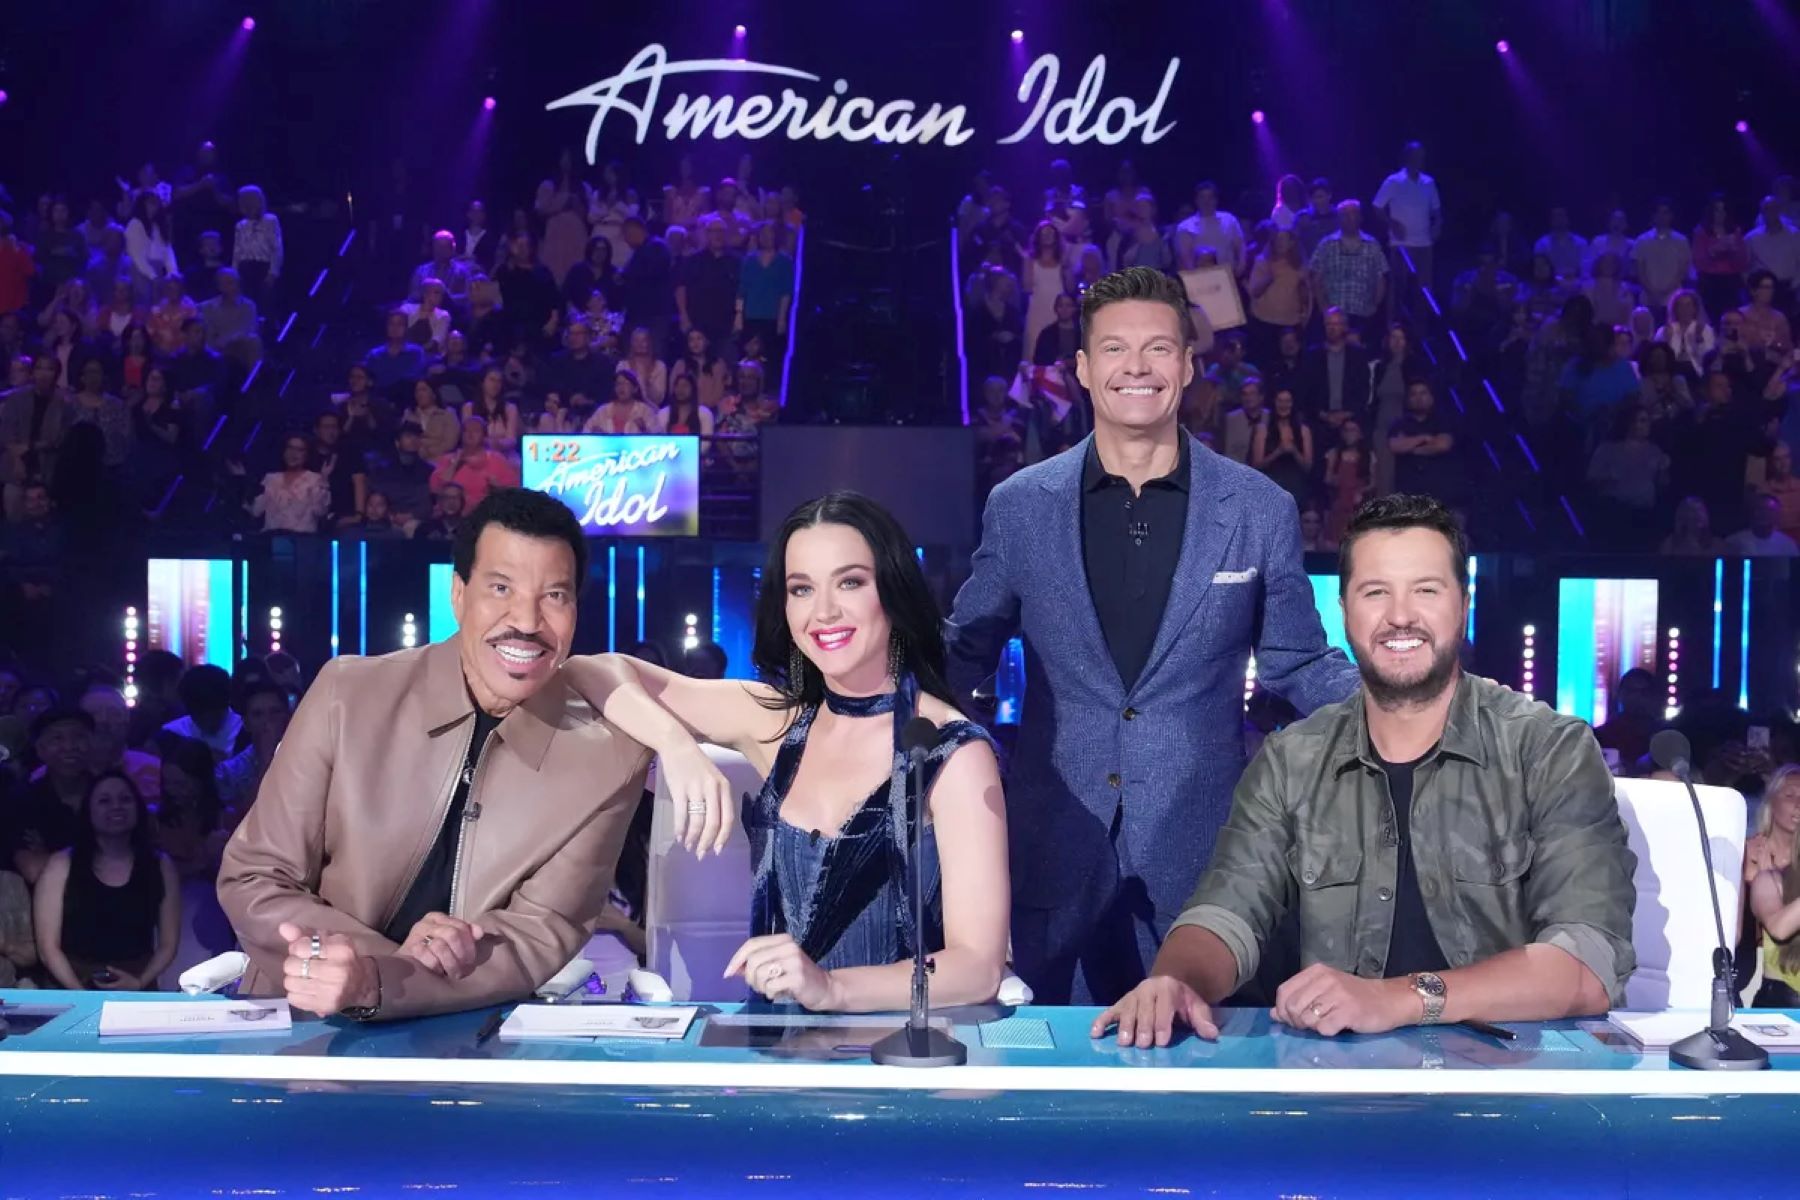 How To Watch American Idol Live Online